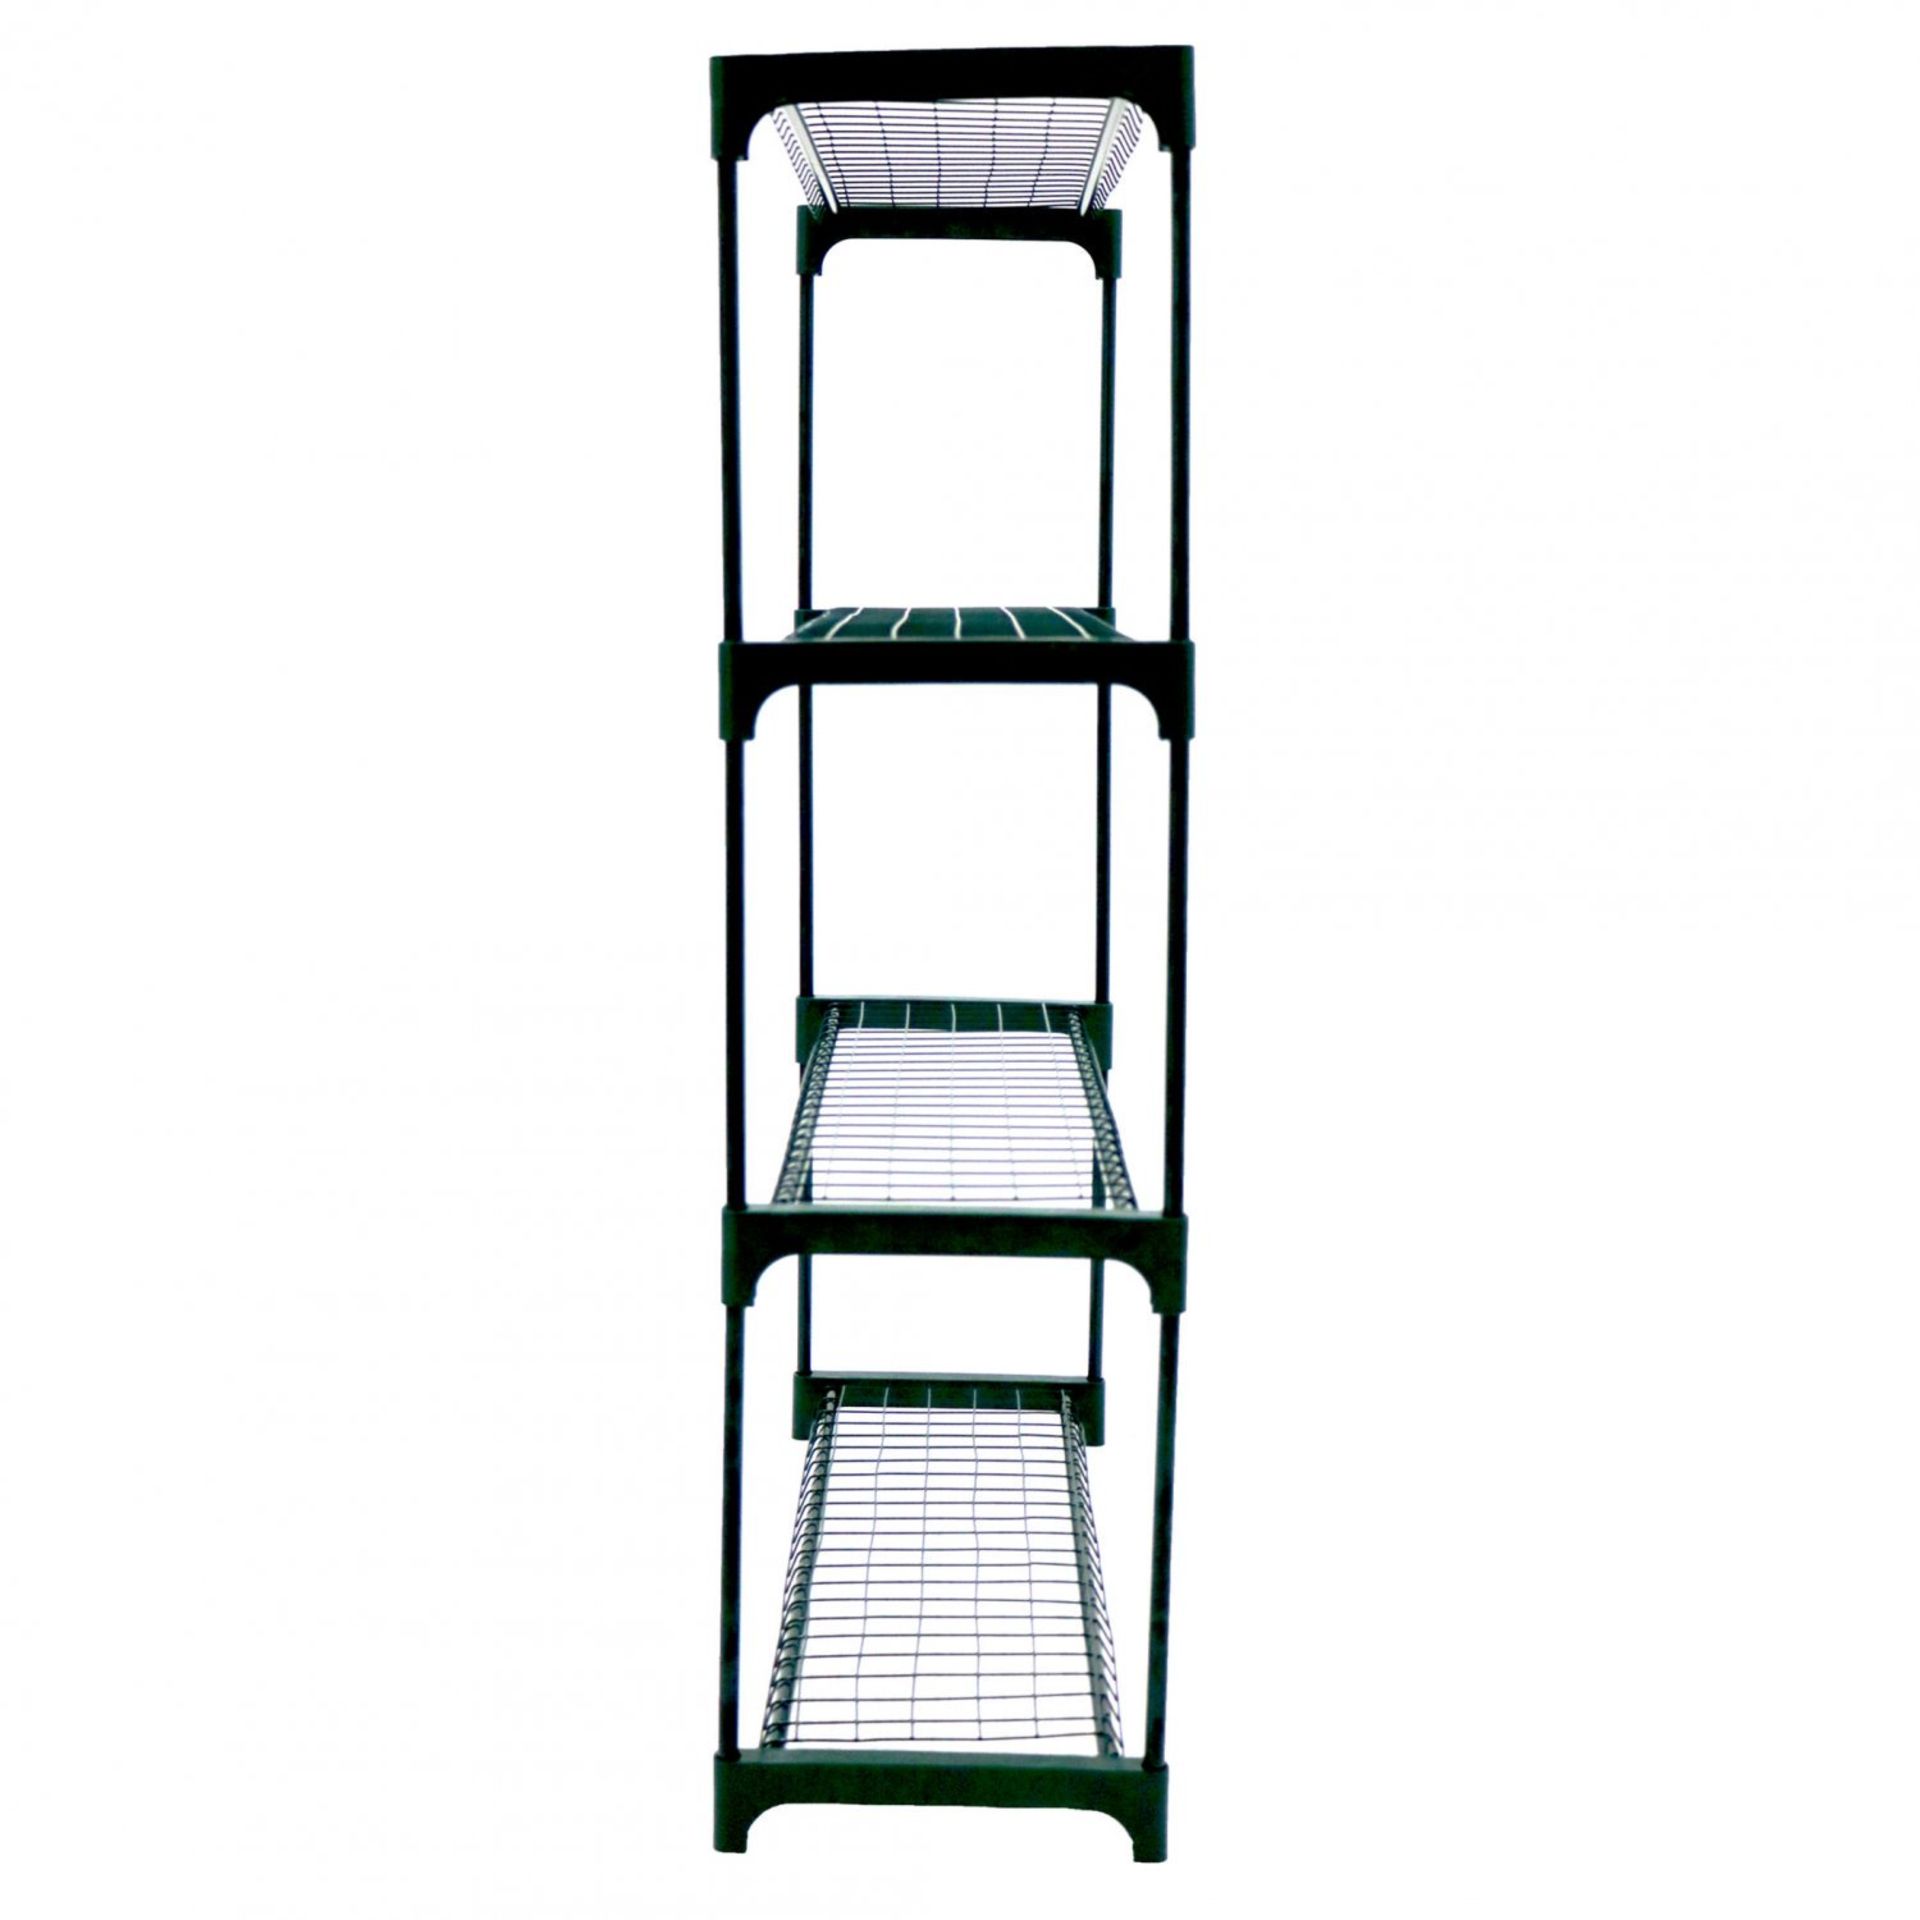 (RU274) Flower Staging (Double Pack) Fantastic value for money, this 4 tier Greenhouse ... - Image 2 of 2